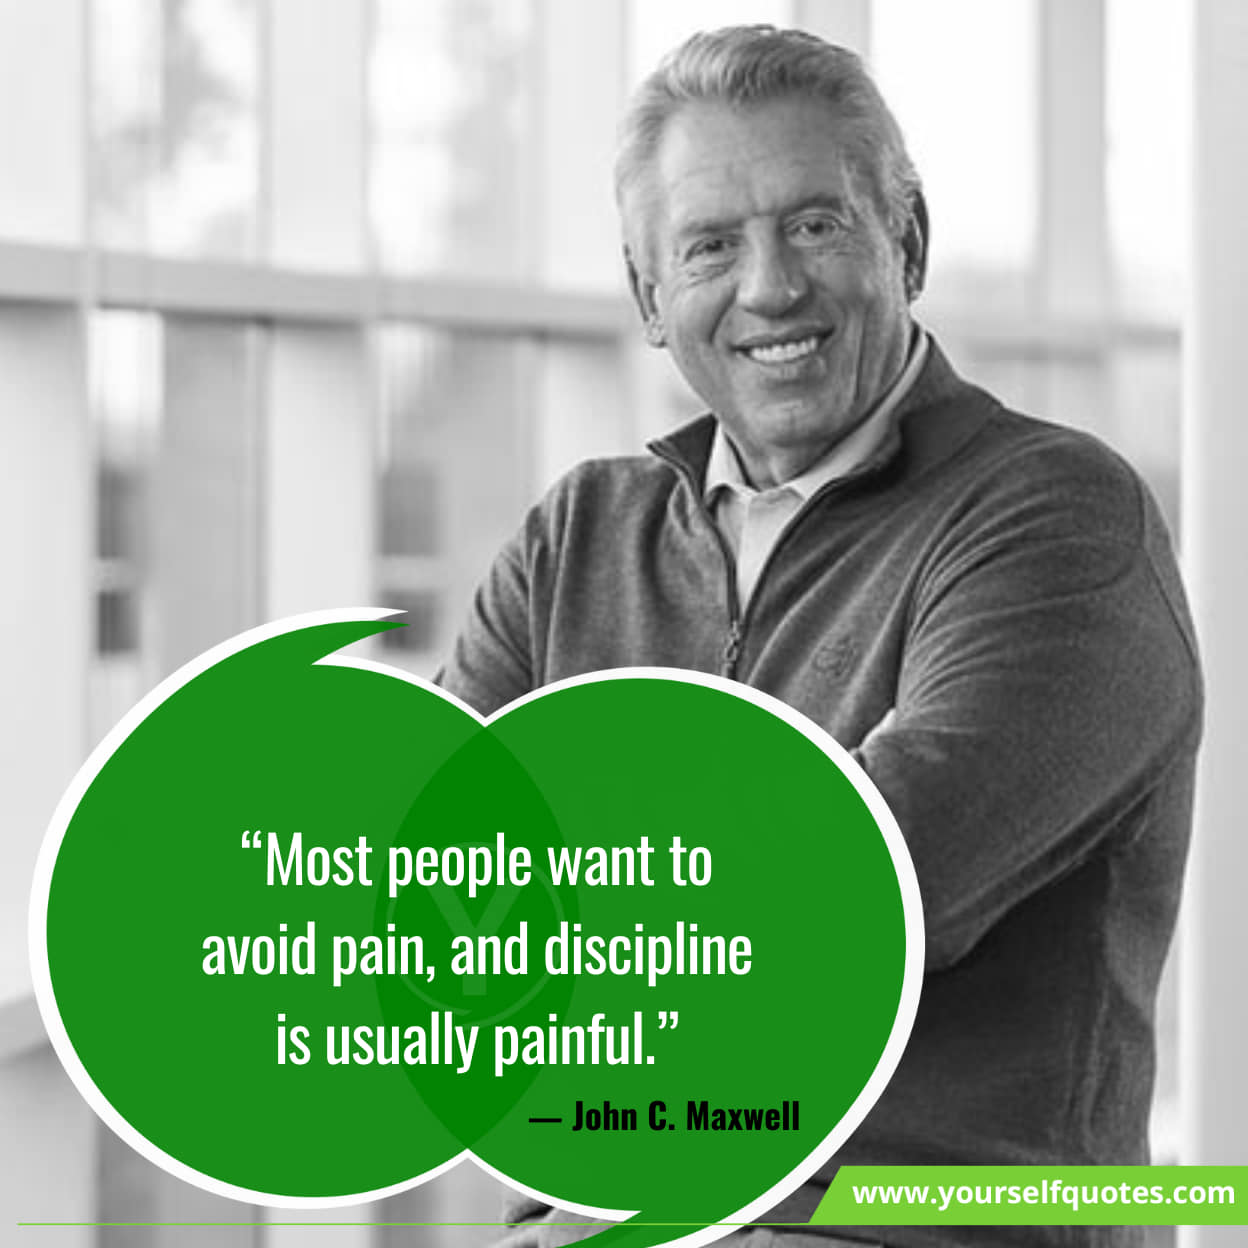 John C. Maxwell quotes on character and integrity